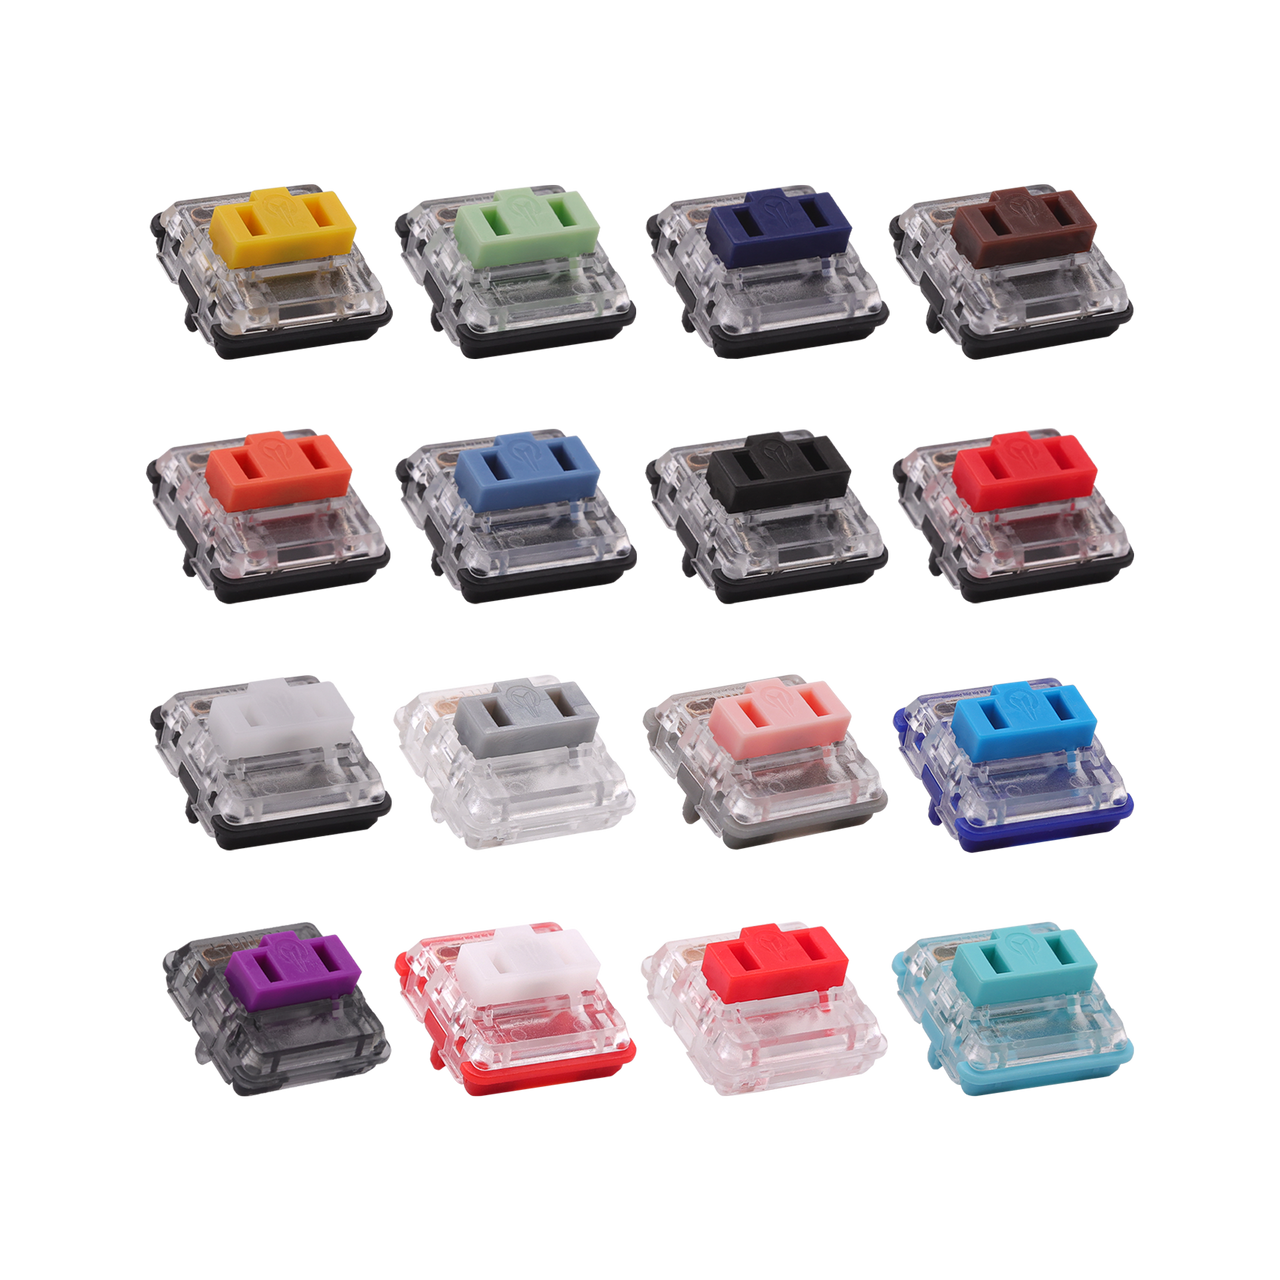 Kailh Low Profile Choc Switches - 16 types-Chosfox